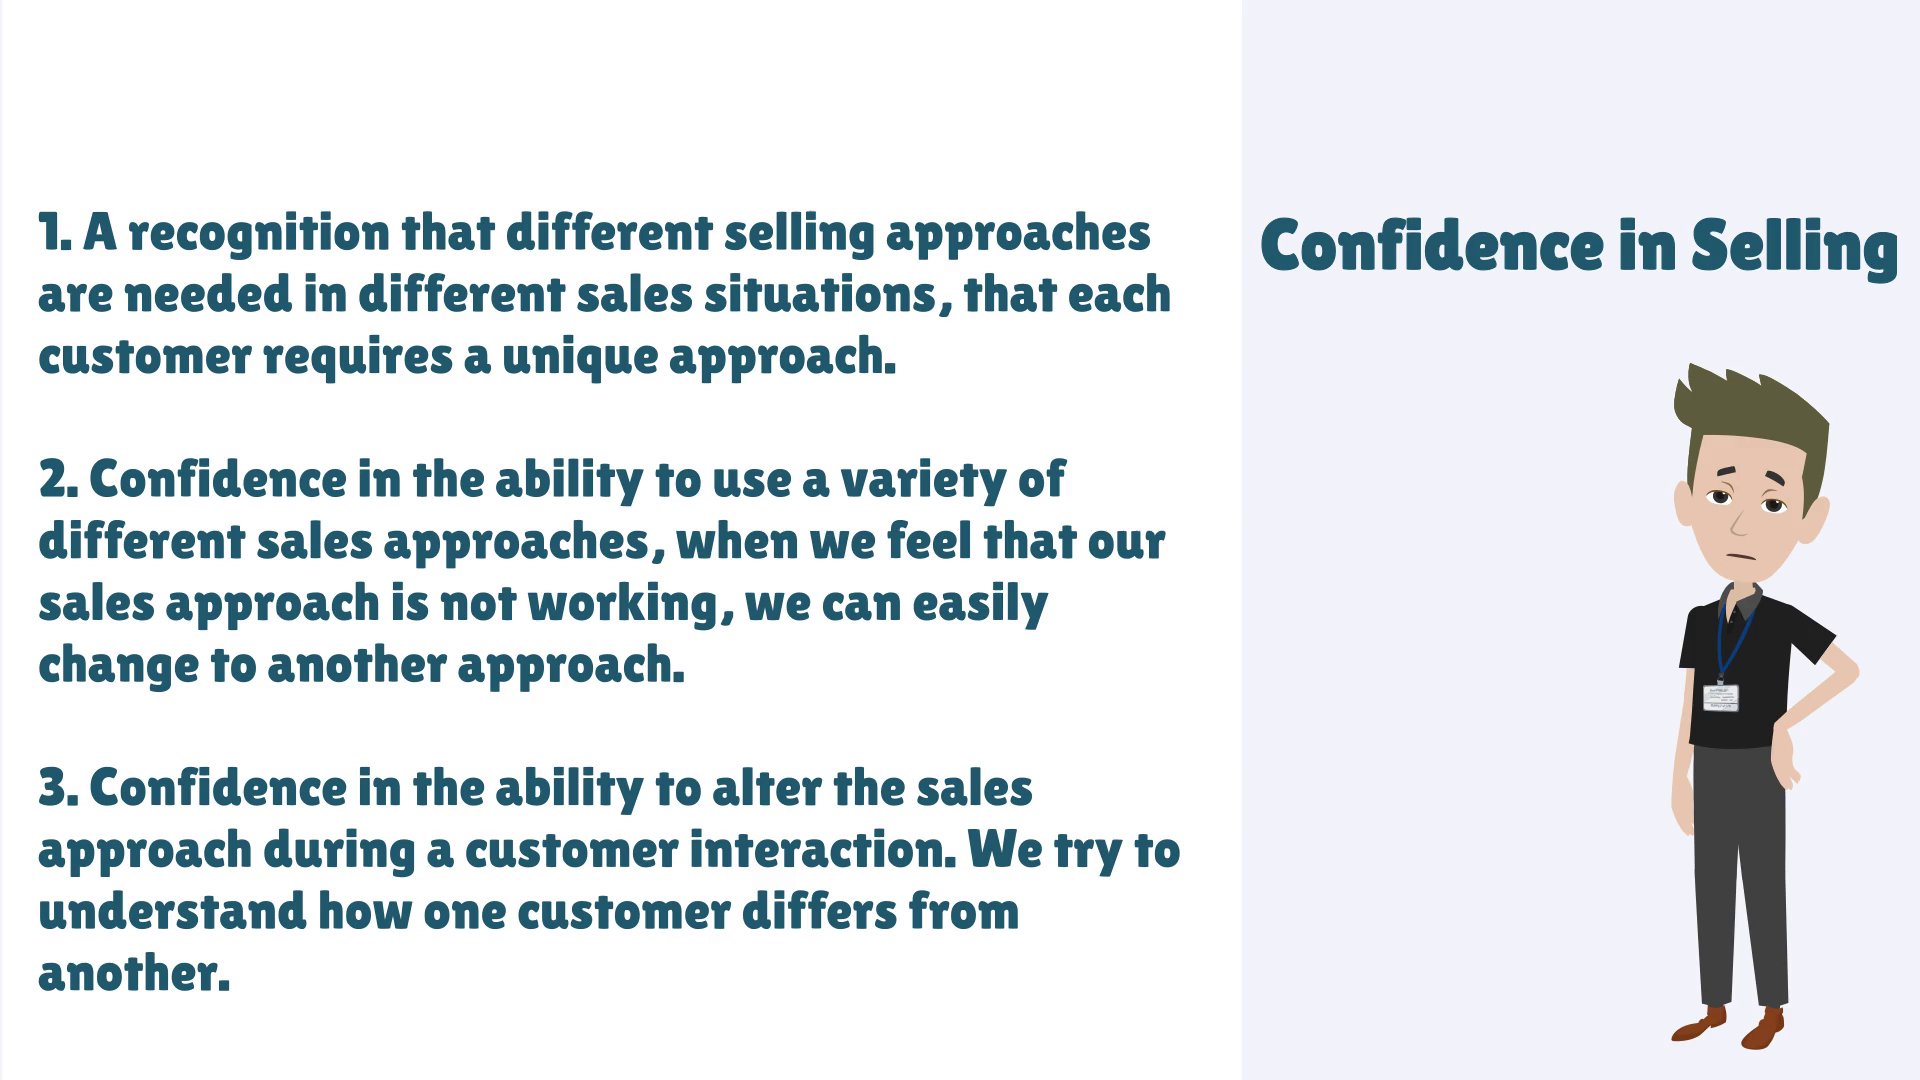 1. A recognition that different selling approaches
are needed in different sales situations, that each
customer requires a unique approach.

2. Confidence in the ability to use a variety of
different sales approaches, when we feel that our
sales approach is not working, we can easily
change to another approach.

3. Confidence in the ability to alter the sales
approach during a customer interaction. We try to
understand how one customer differs from
another.

Confidence in Selling

oD
vw